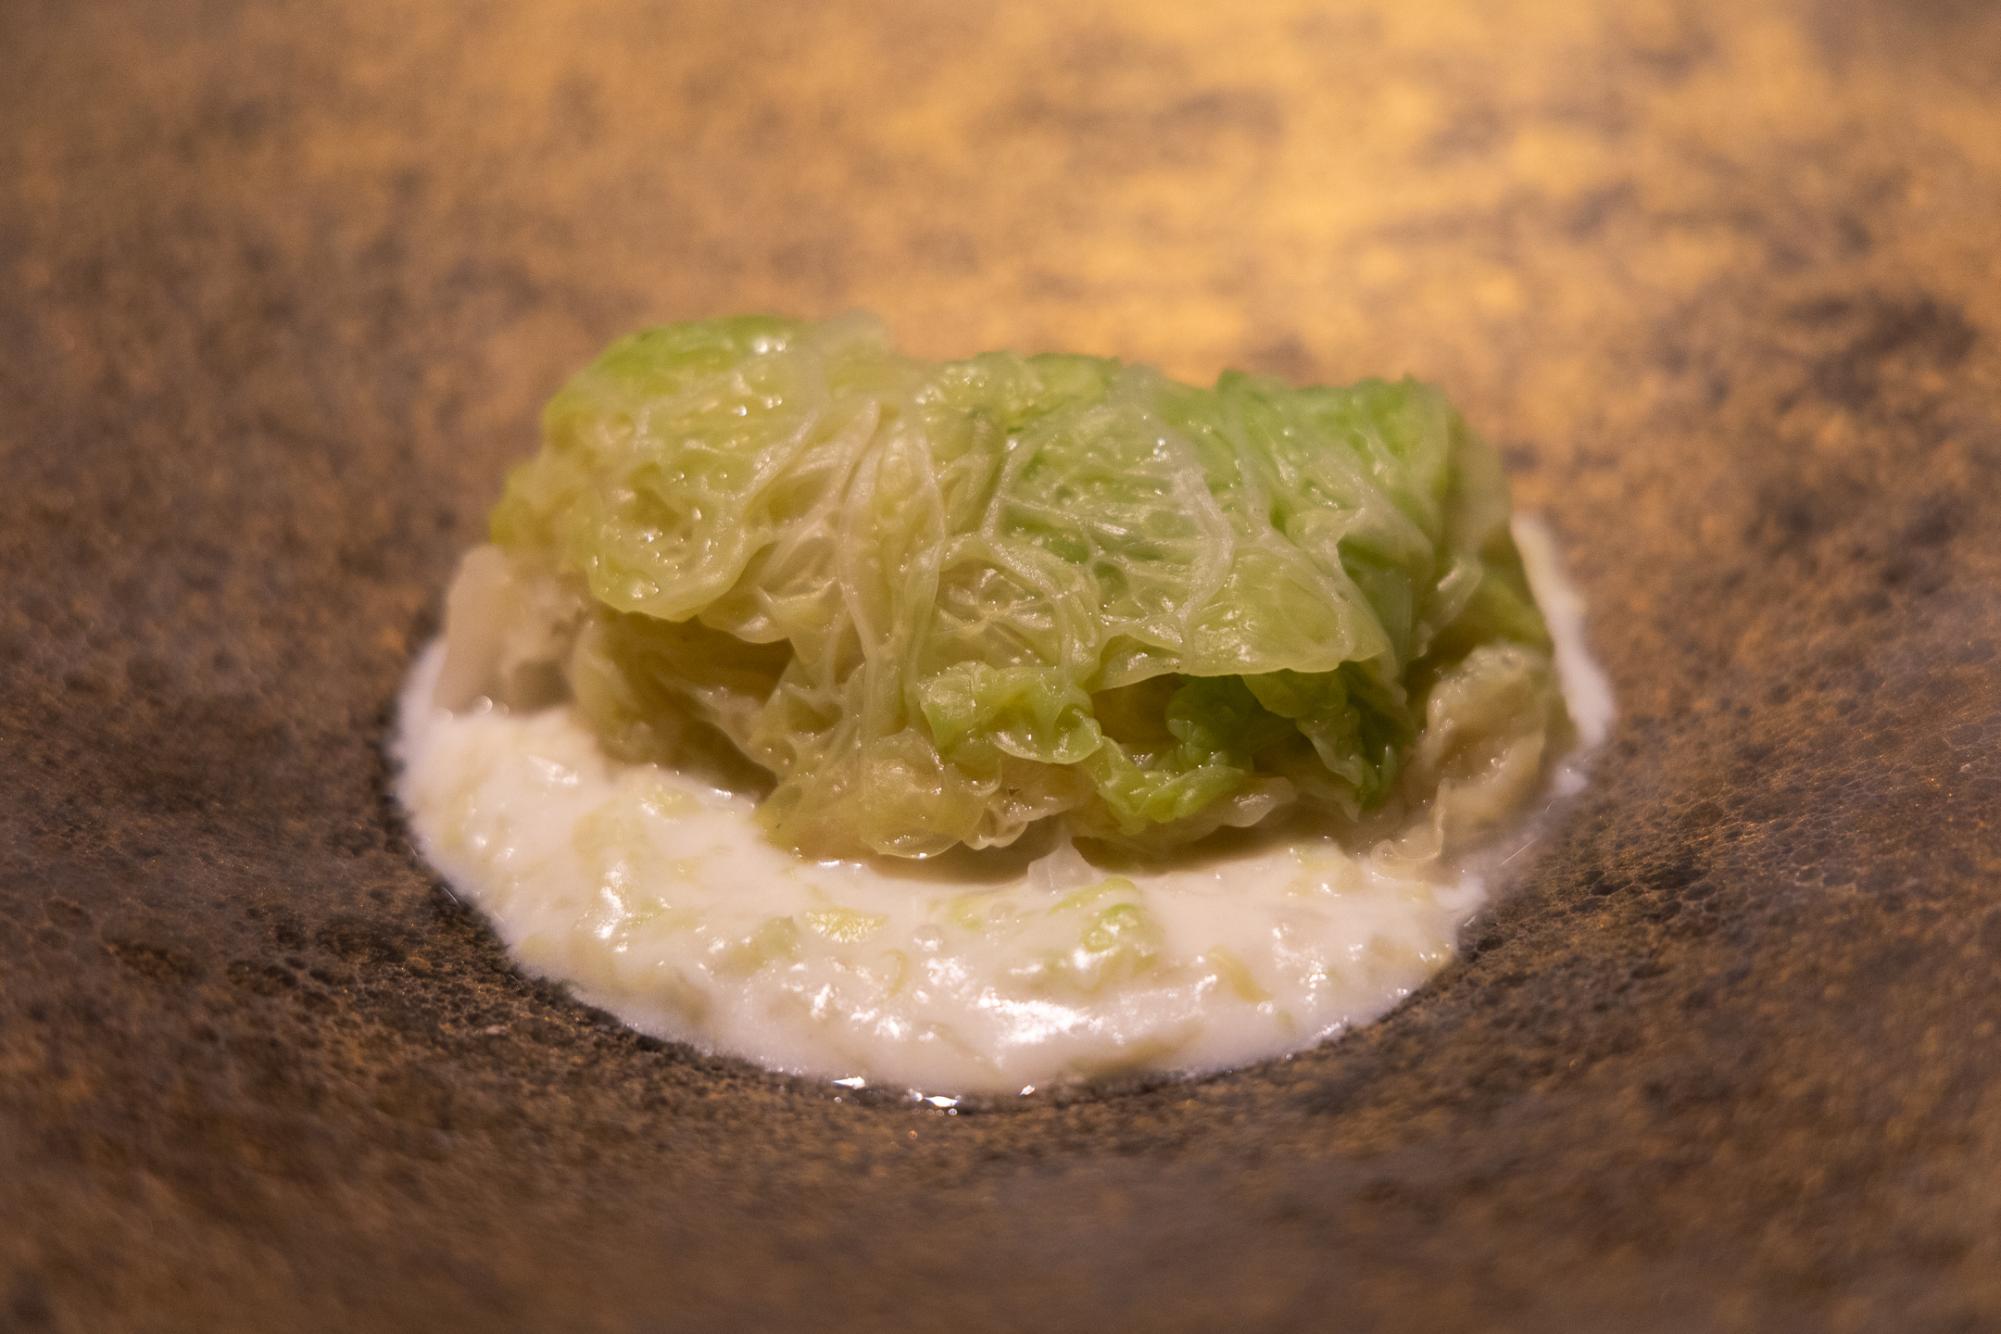 A piece of cabbage and blue cheese.